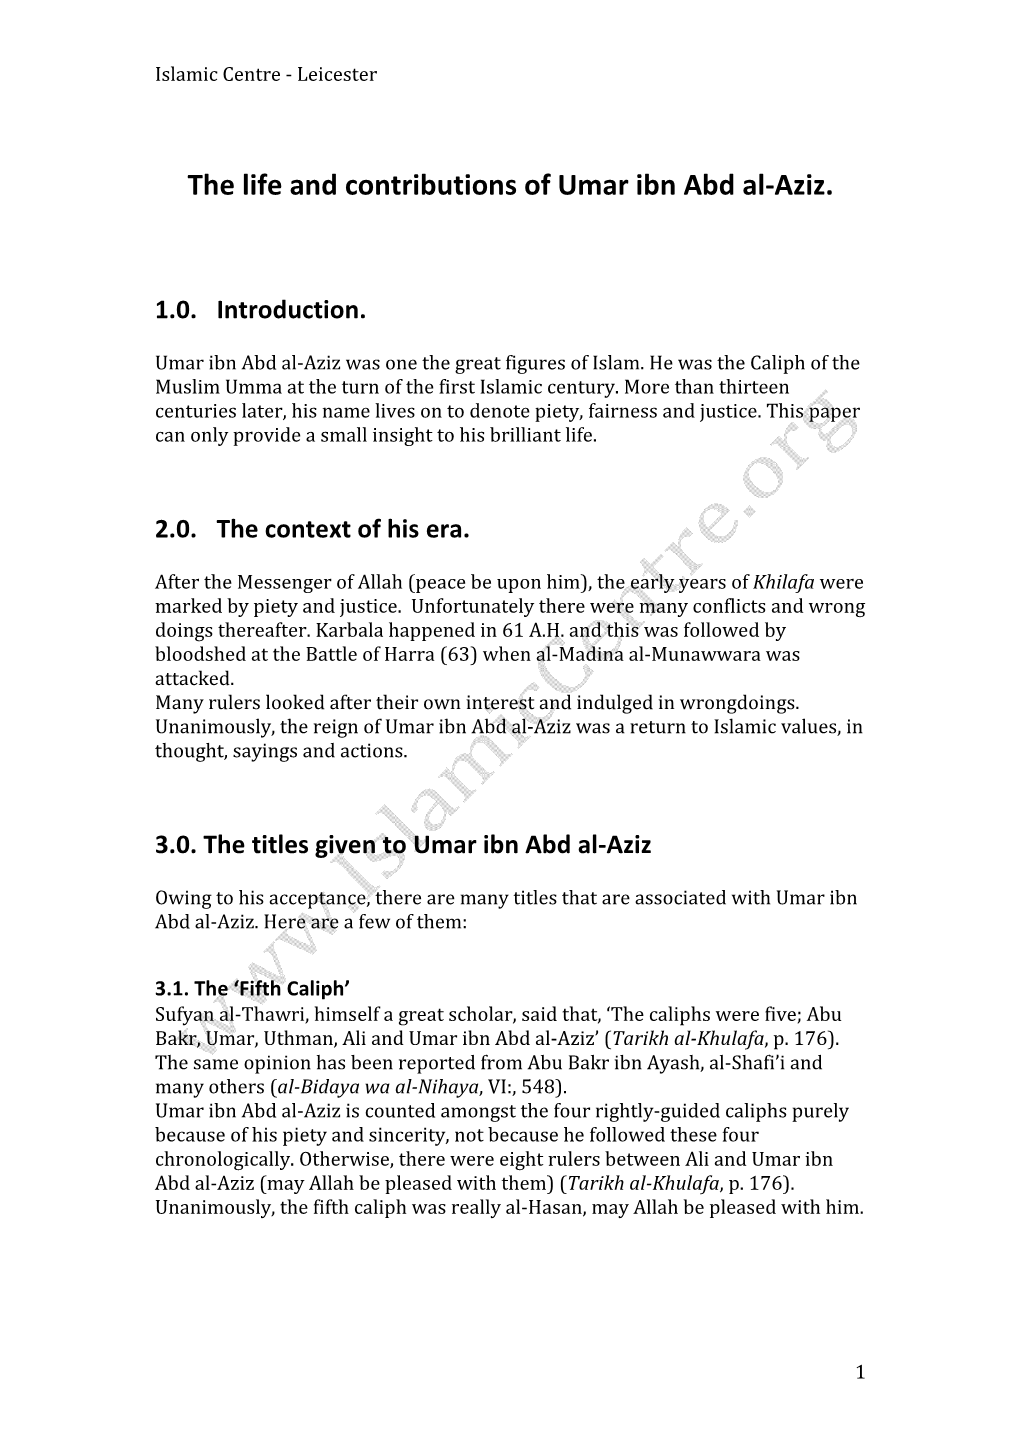 The Life and Contributions of Umar Ibn Abd Al-Aziz